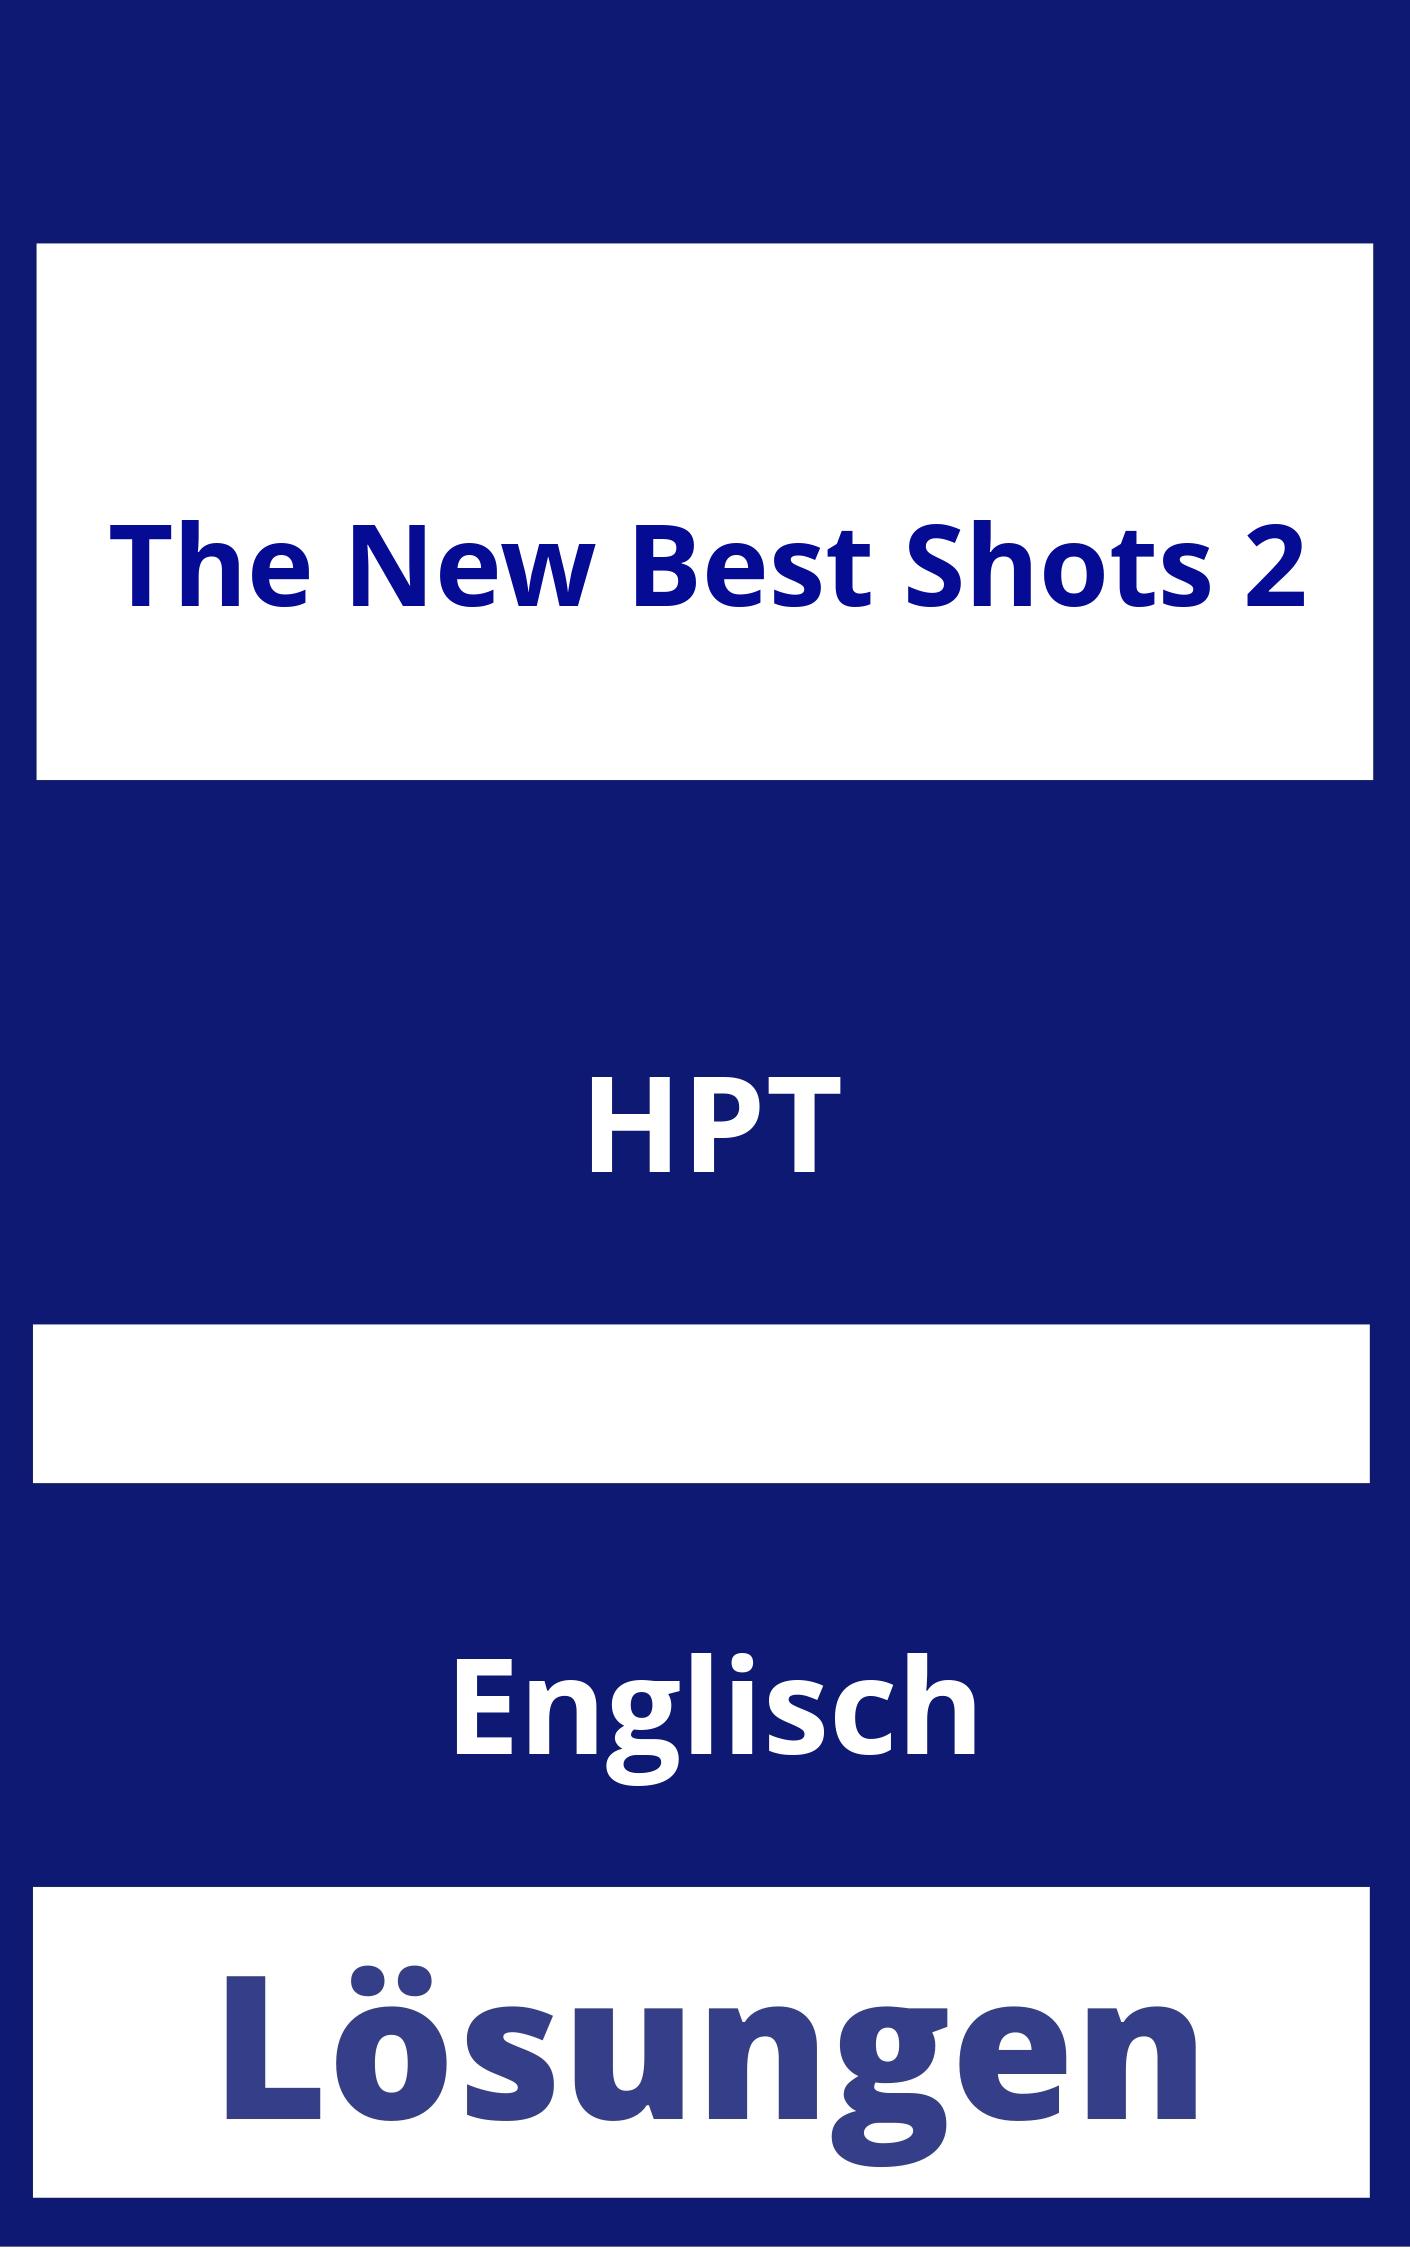 The New Best Shots 2